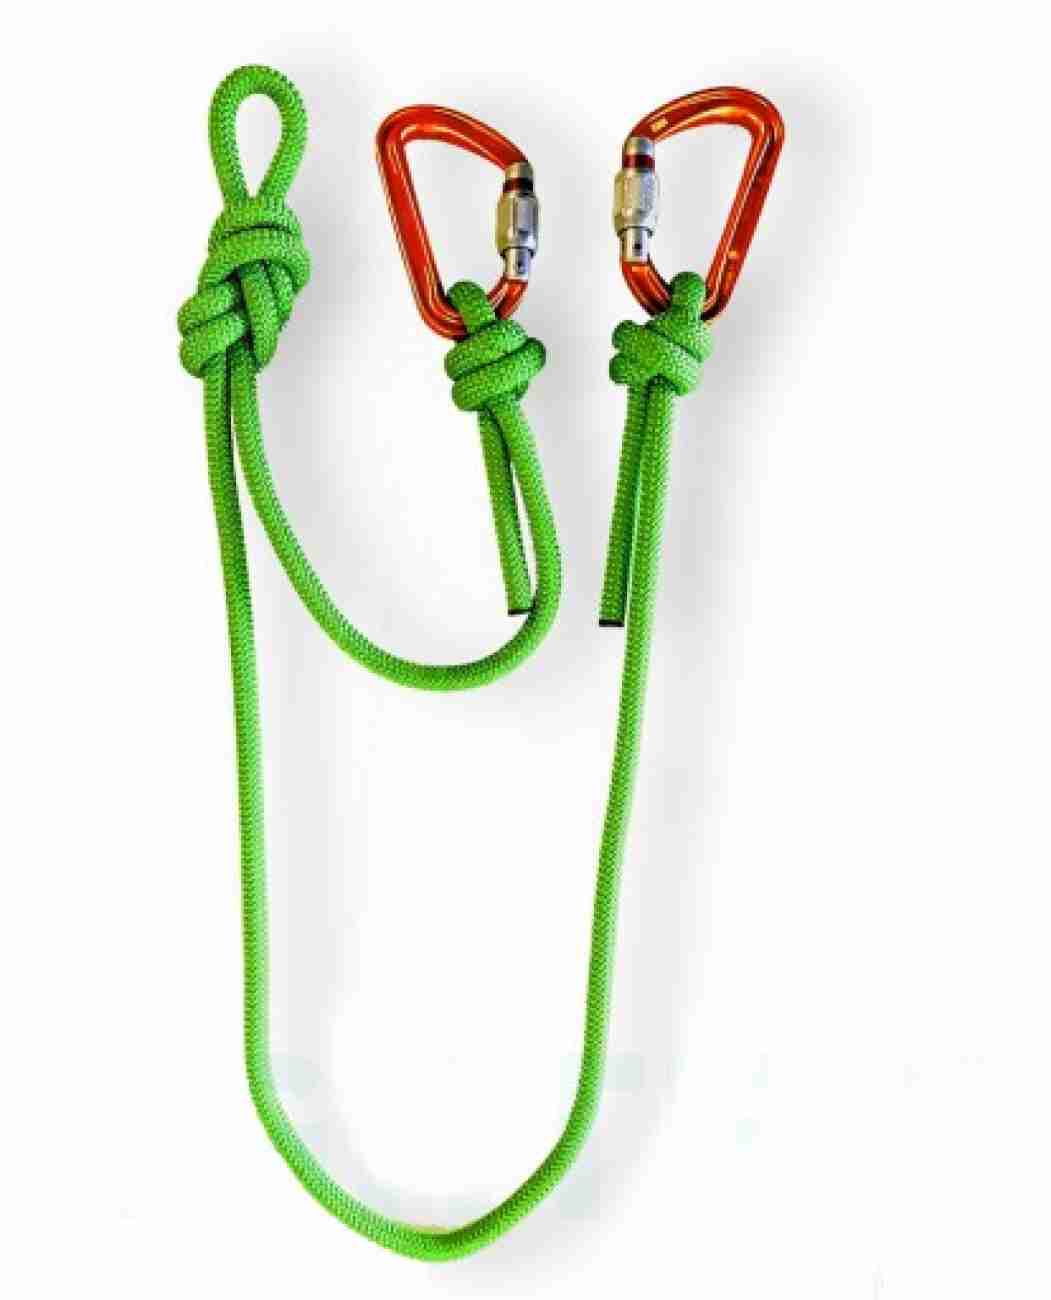 Add Gear Nylon Rope 8 mm - Climbing Cowtail - Strong Multiporpose